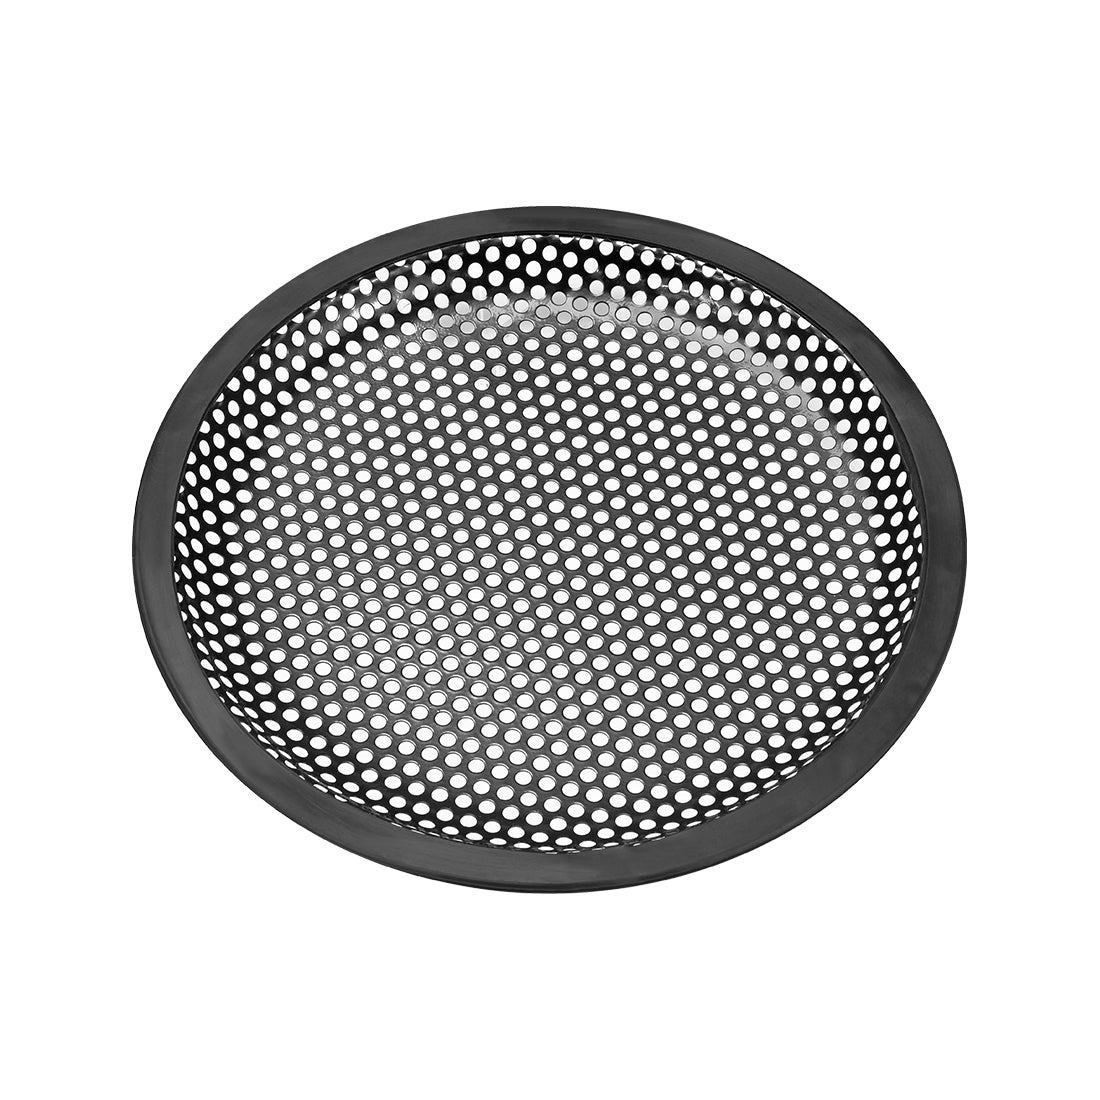 uxcell Uxcell 2pcs 10" Speaker Waffle Grill Metal Mesh Audio Subwoofer Guard Protector Cover with Clips,Screws